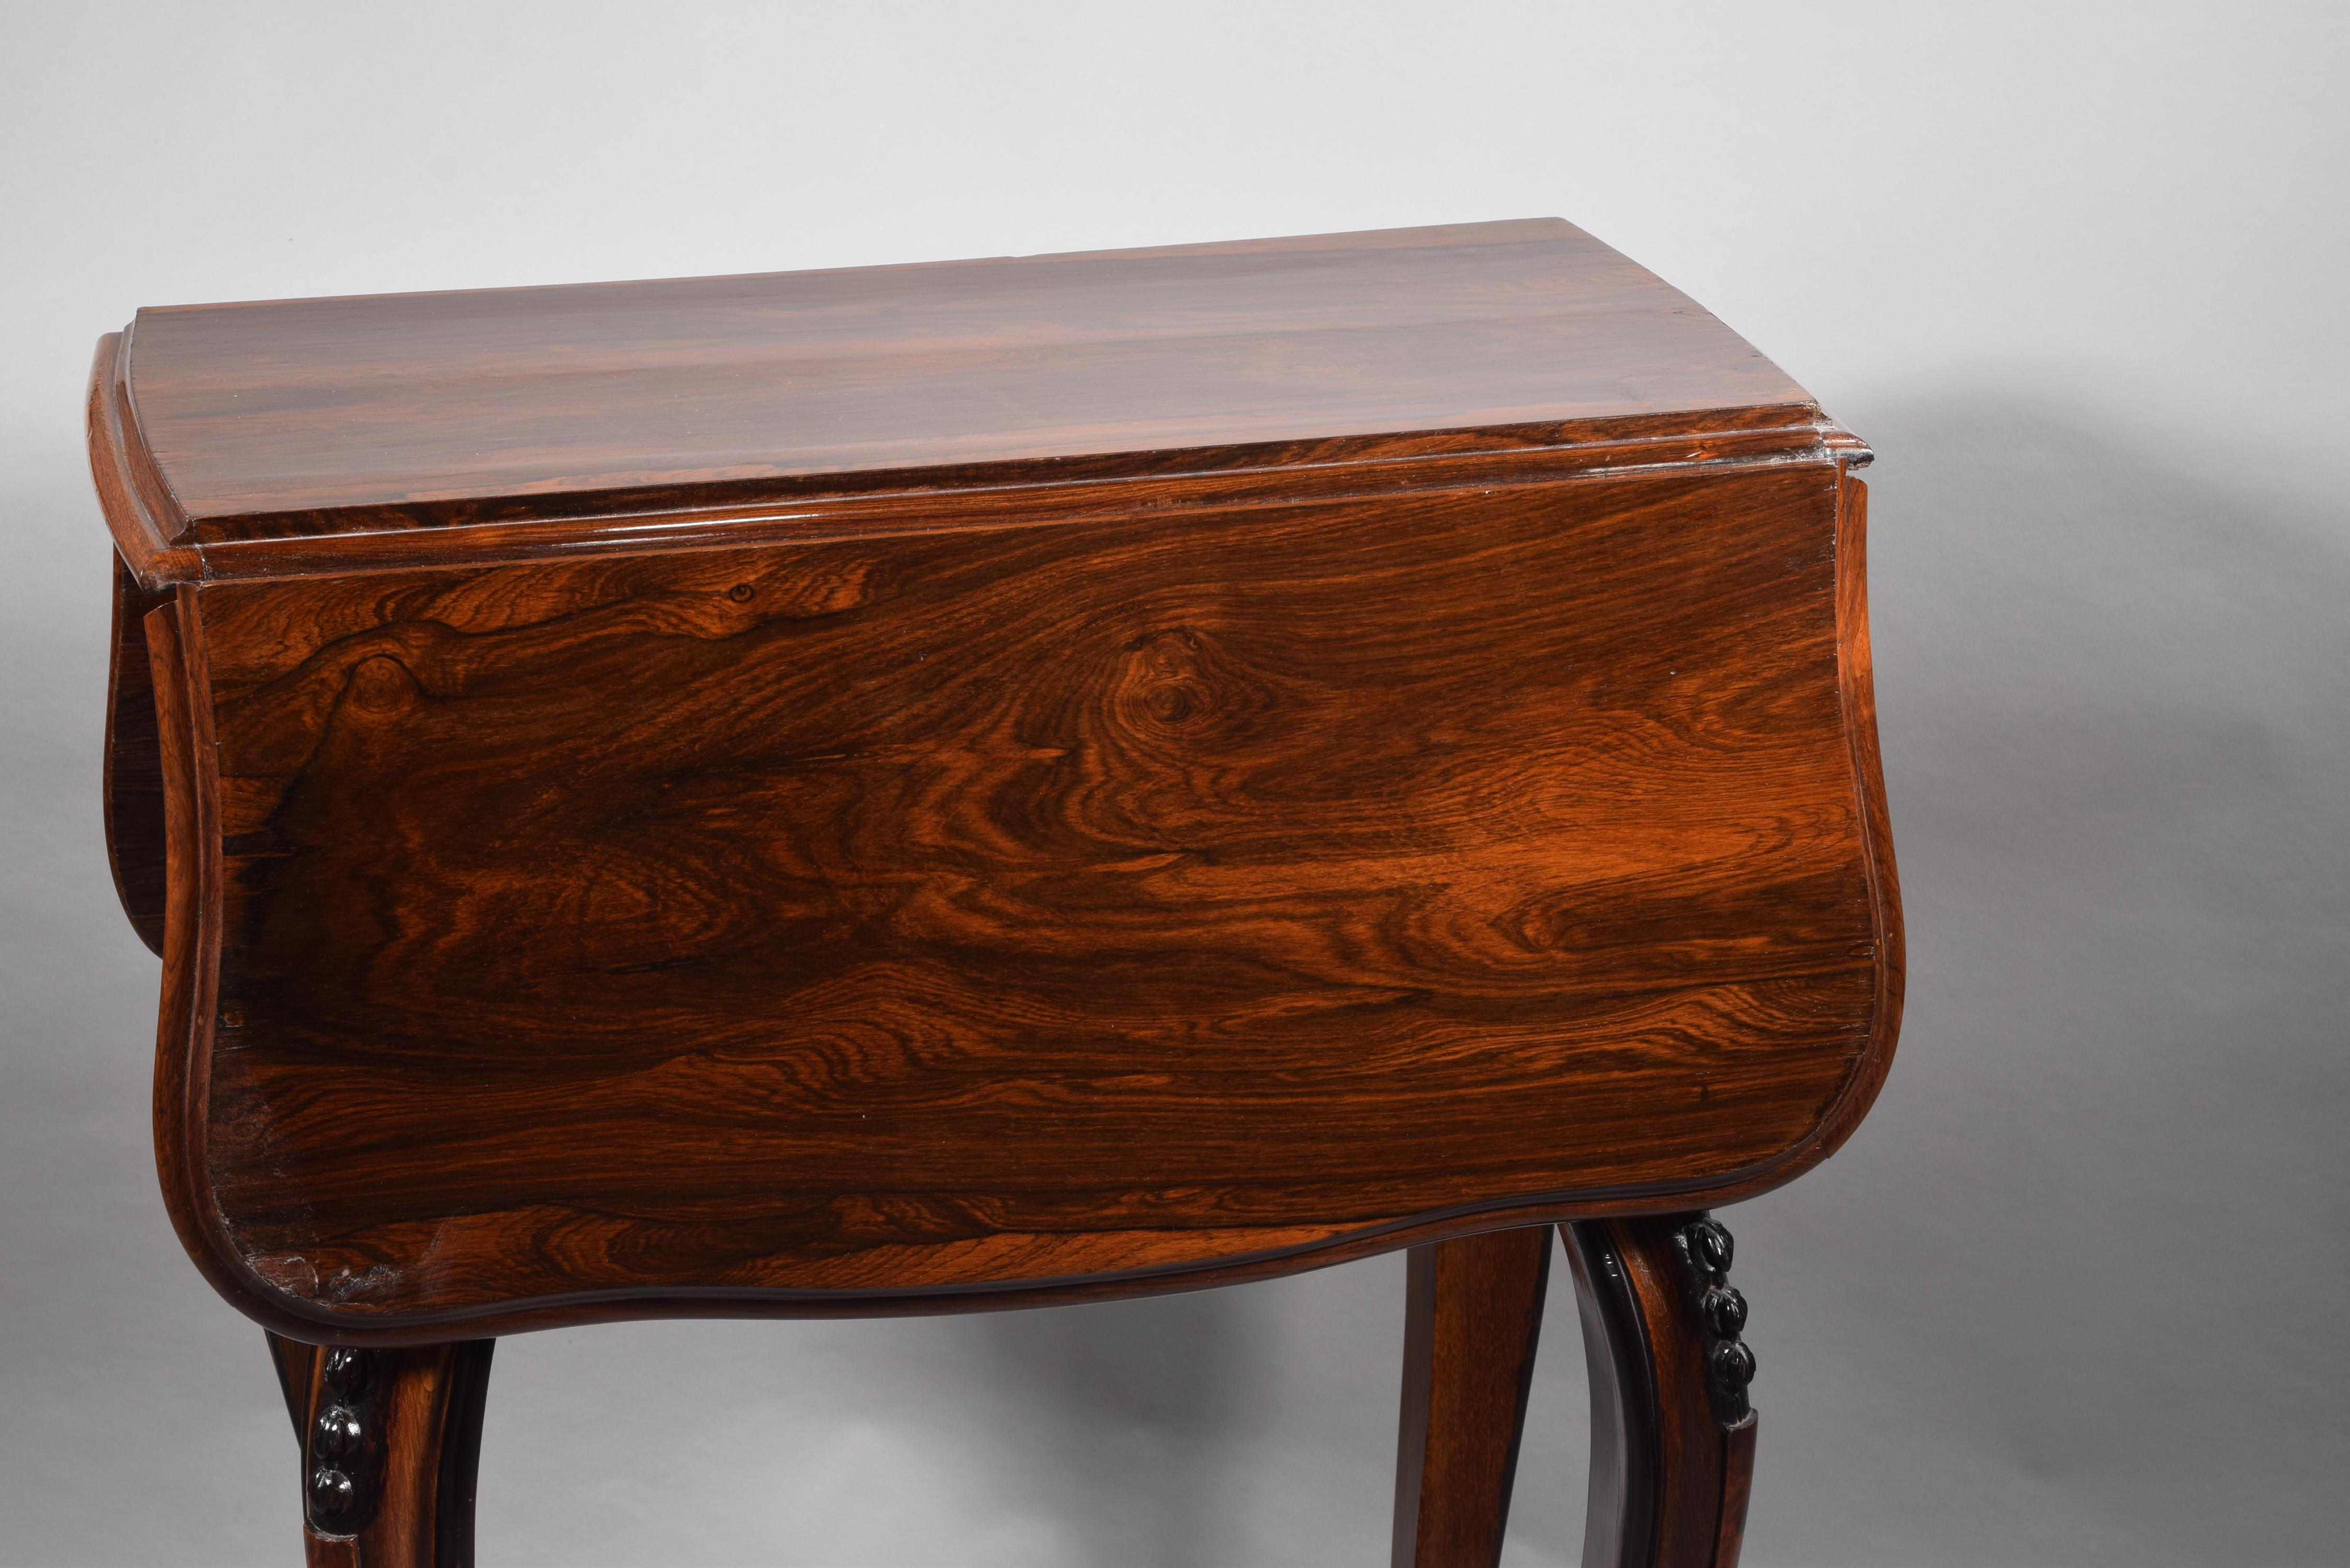 Sewing Table with Wings, Palosanto or Rosewood Wood, 19th Century For Sale 10